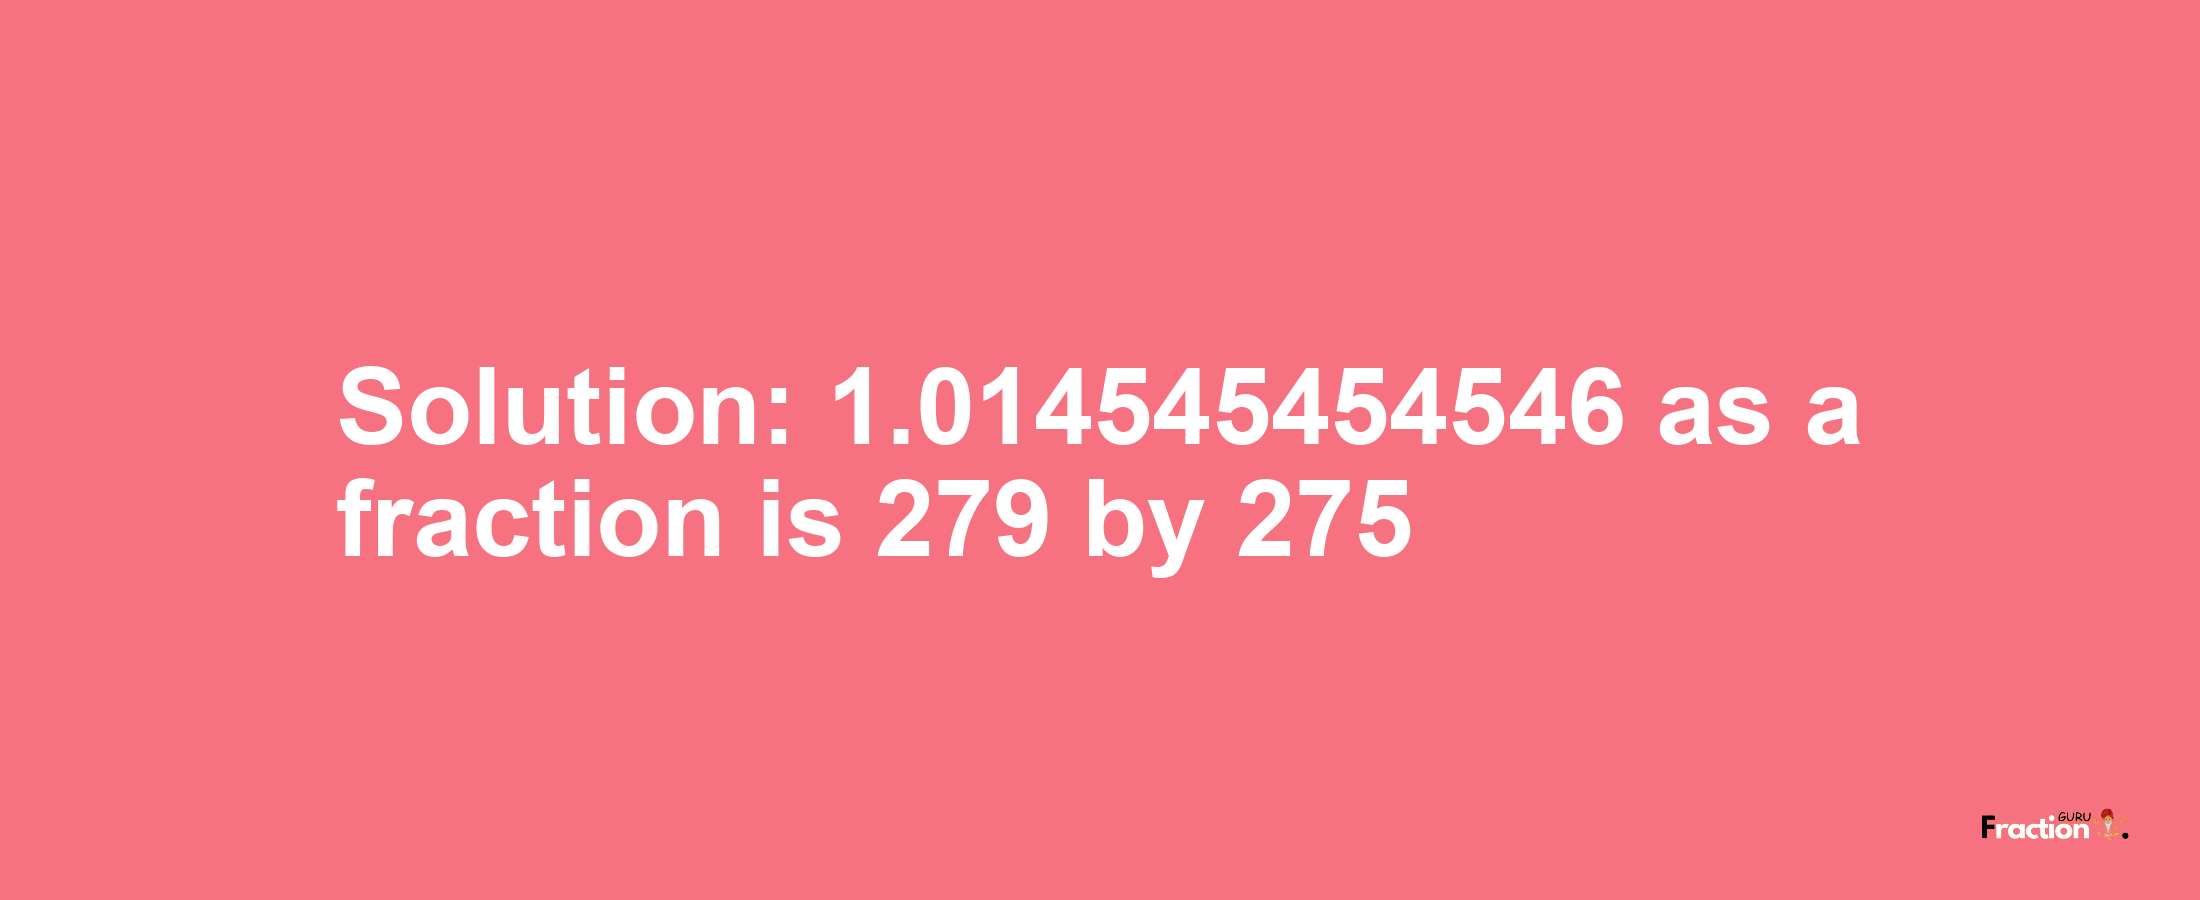 Solution:1.014545454546 as a fraction is 279/275